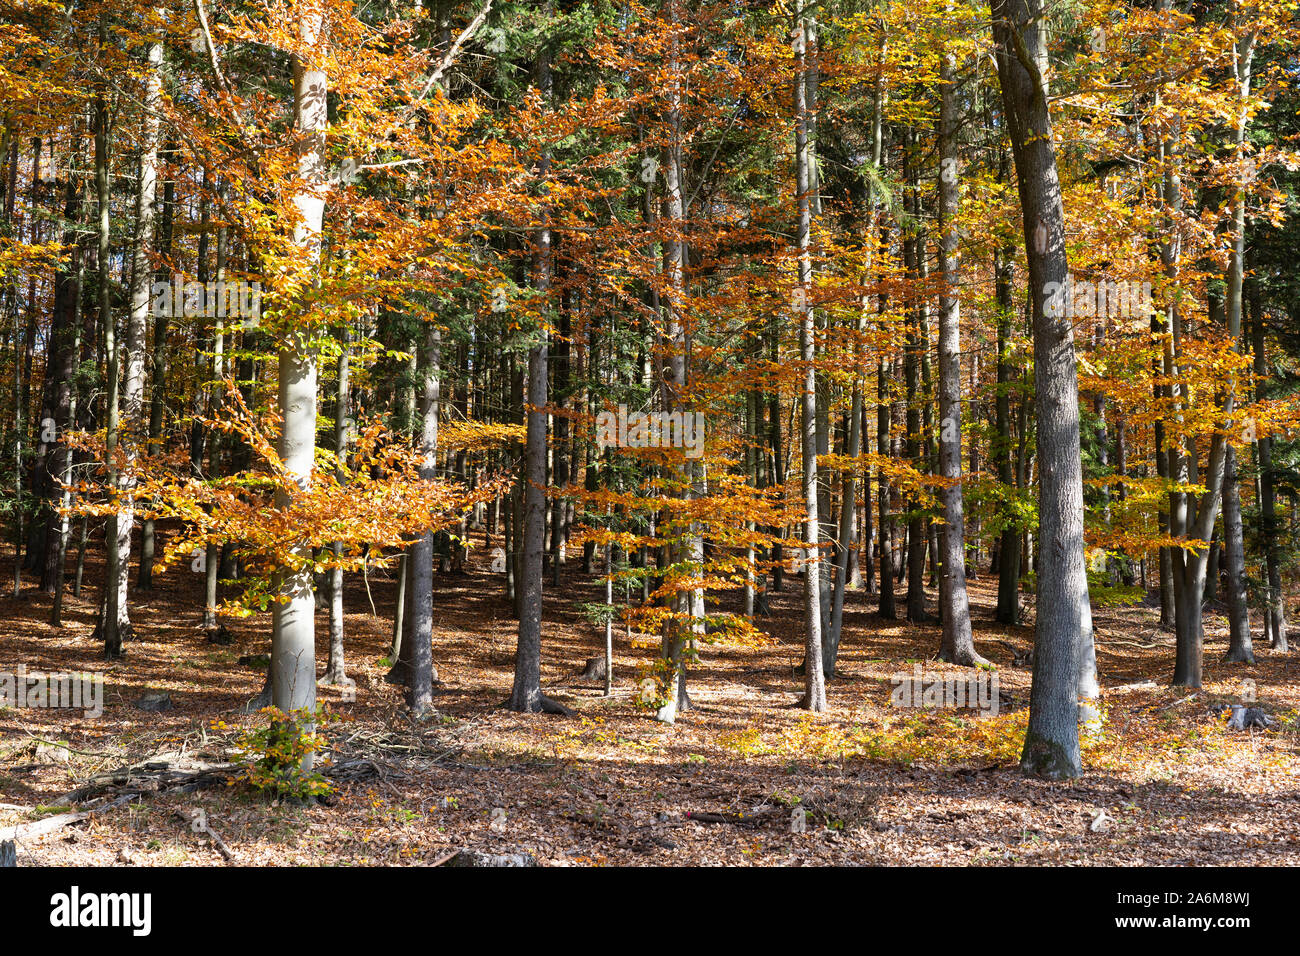 Colorful Beech trees (Fagus Sylvatica) and Douglas Firs (pseudotsuga menziesii) in a forest in autumn / fall with yellow and orange leaves, Austria Stock Photo